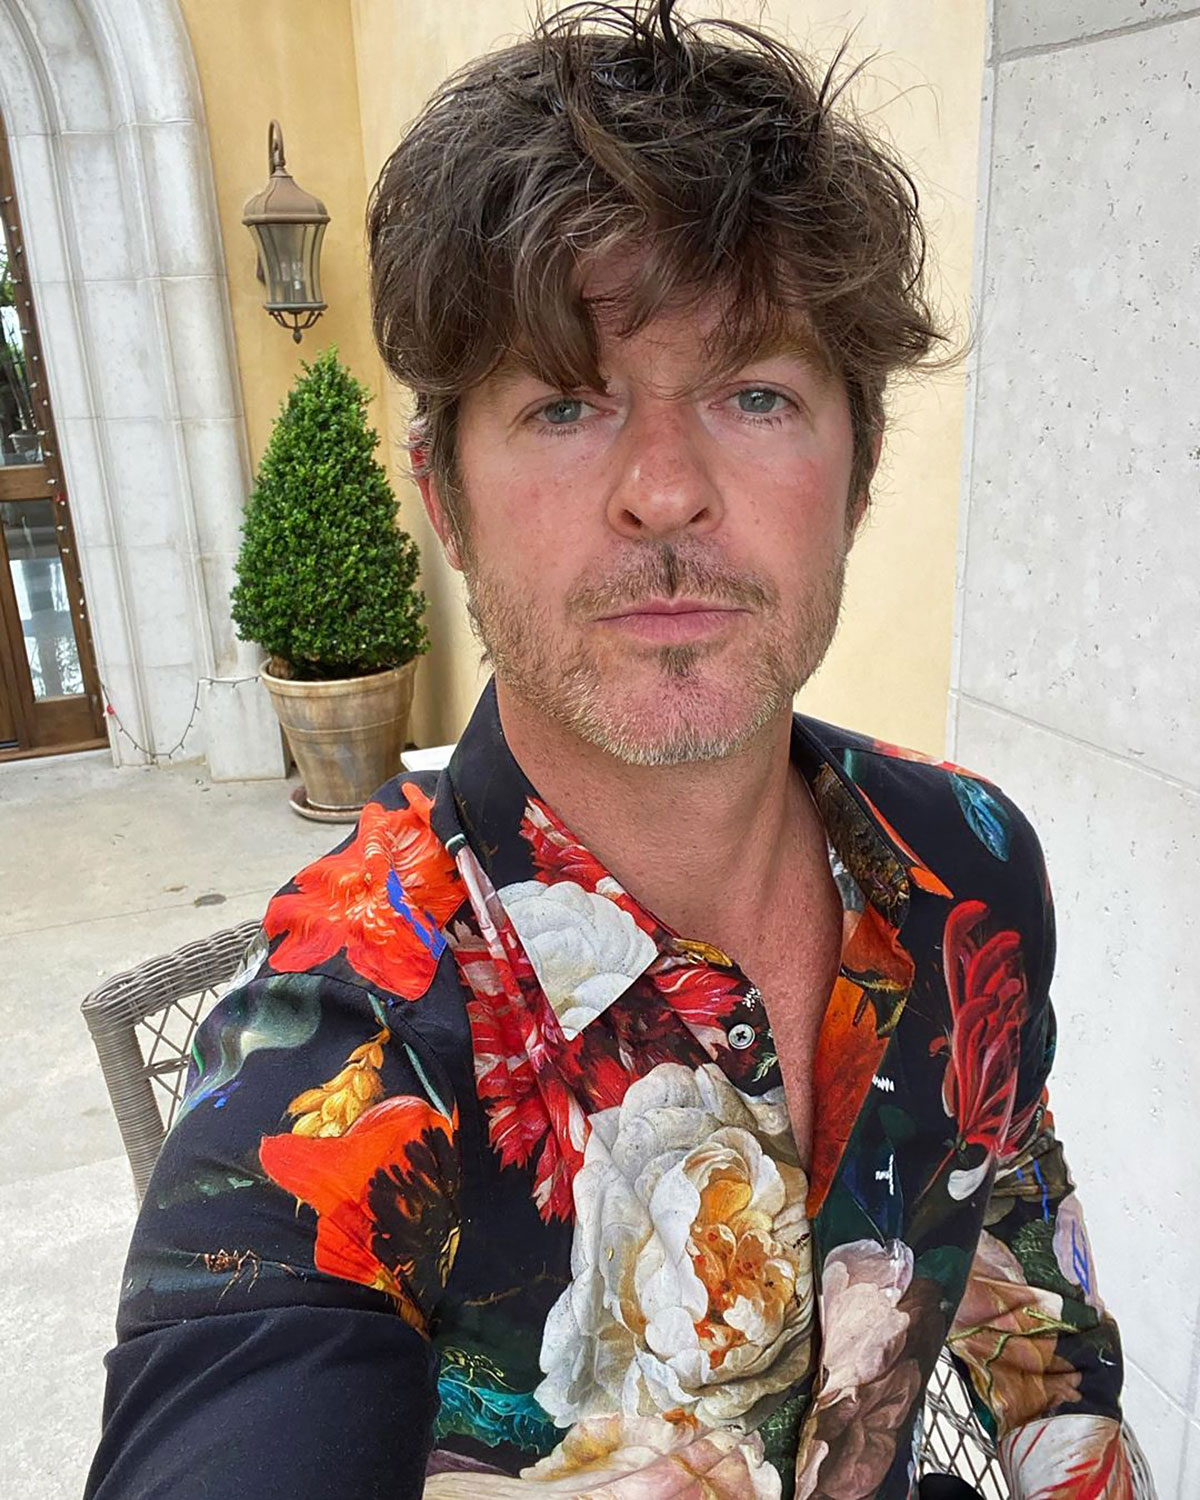 The Internet Has Strong Feelings About Robin Thicke's Long Hair